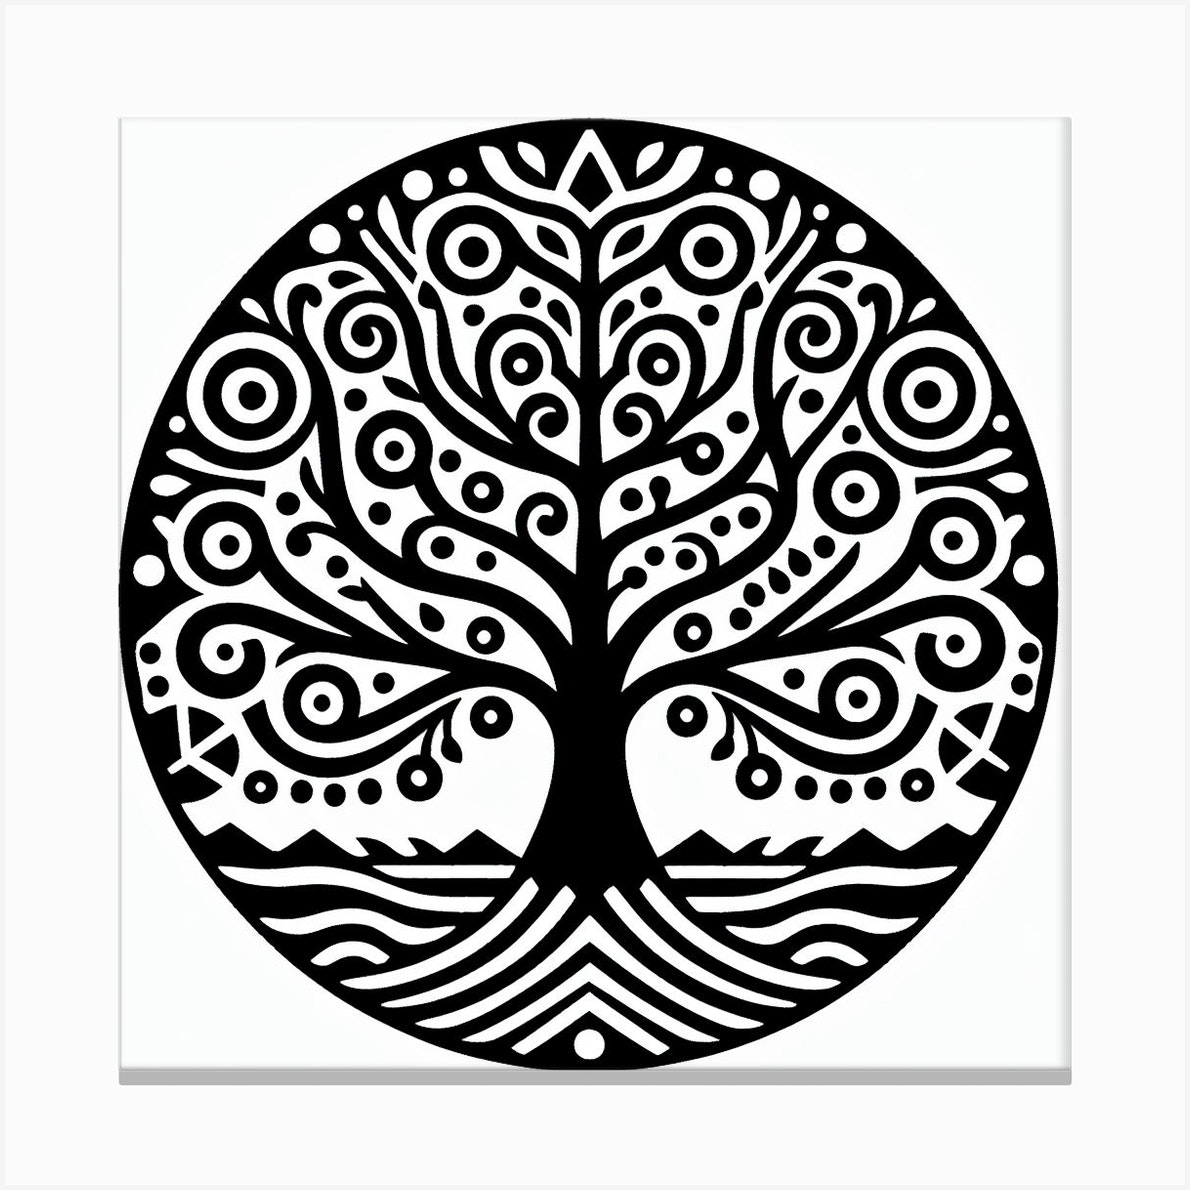 Tree of Life 2 Canvas Print by P&V_printable_art - Fy